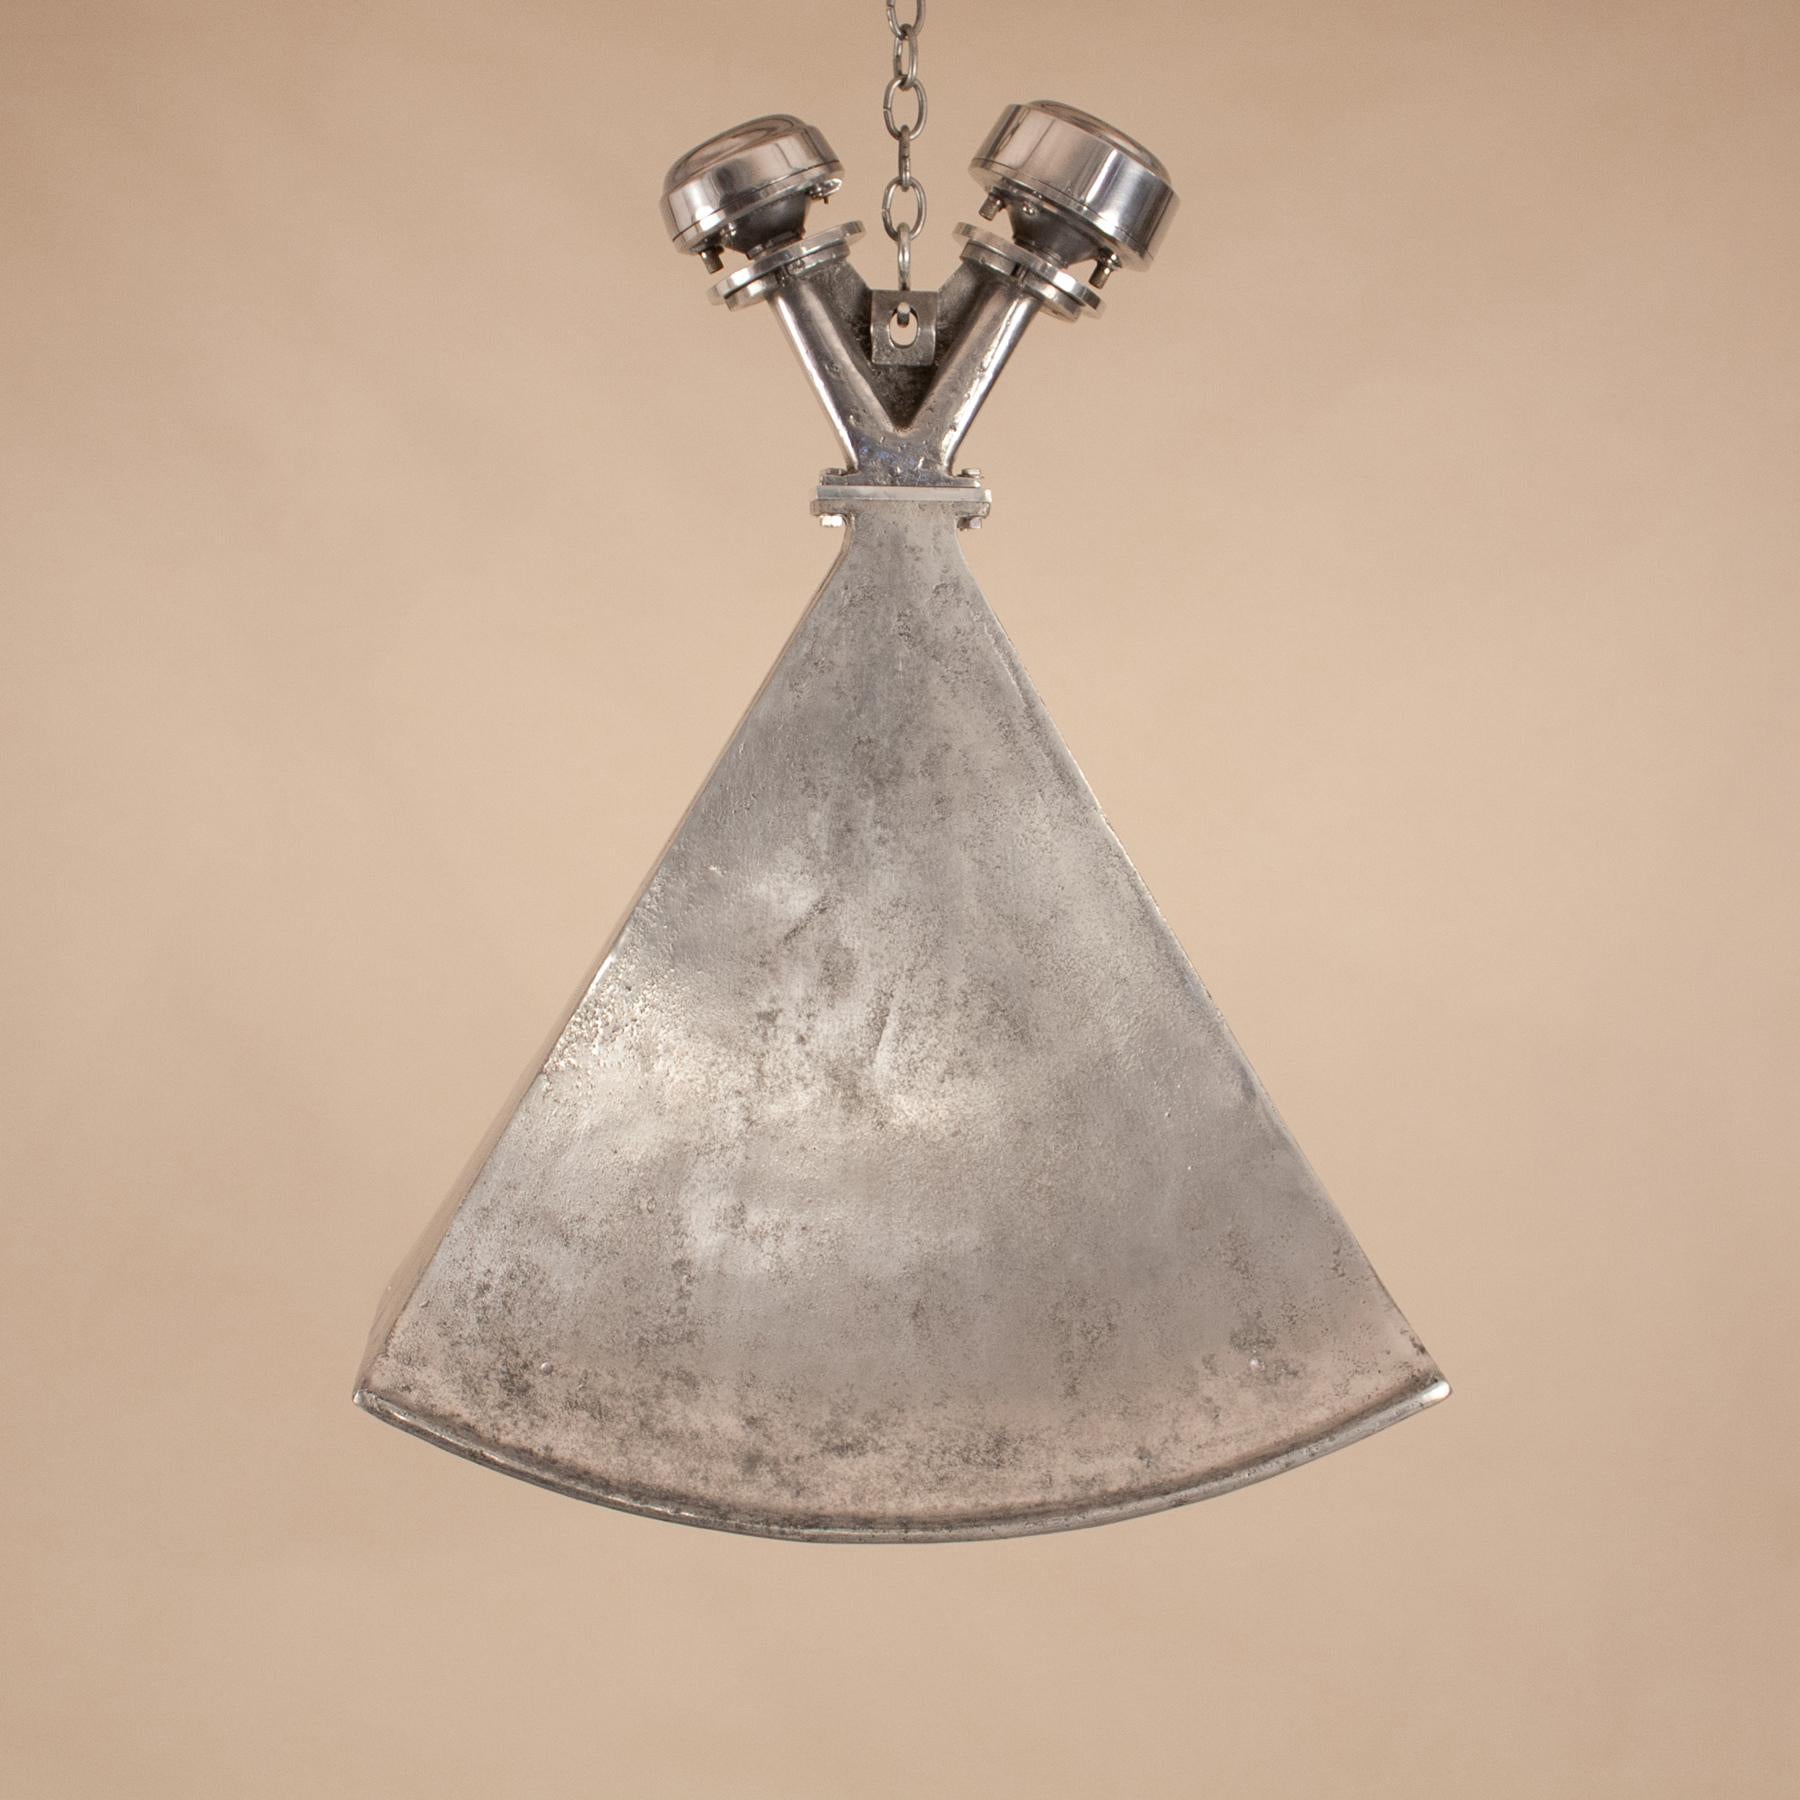 A circa 1950 Bombay movie theatre horn loudspeaker finds new life as an industrial style pendant. This aluminum light has very appealing form and its original distressed patina. Manufactured by Ahuja Radio of India, the speaker is also available